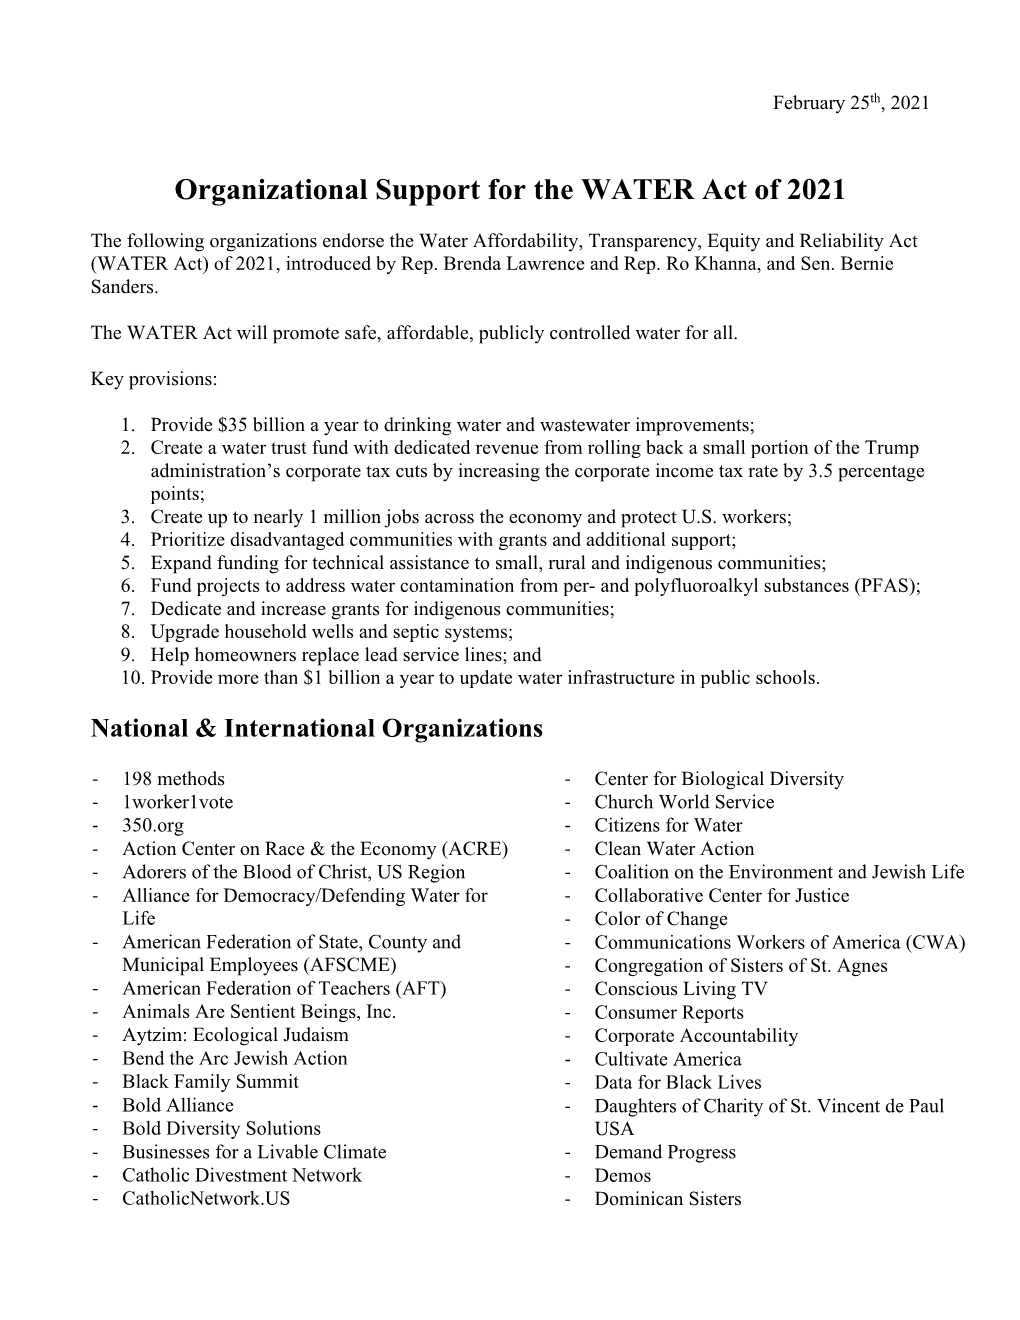 Organizational Support for the WATER Act of 2021